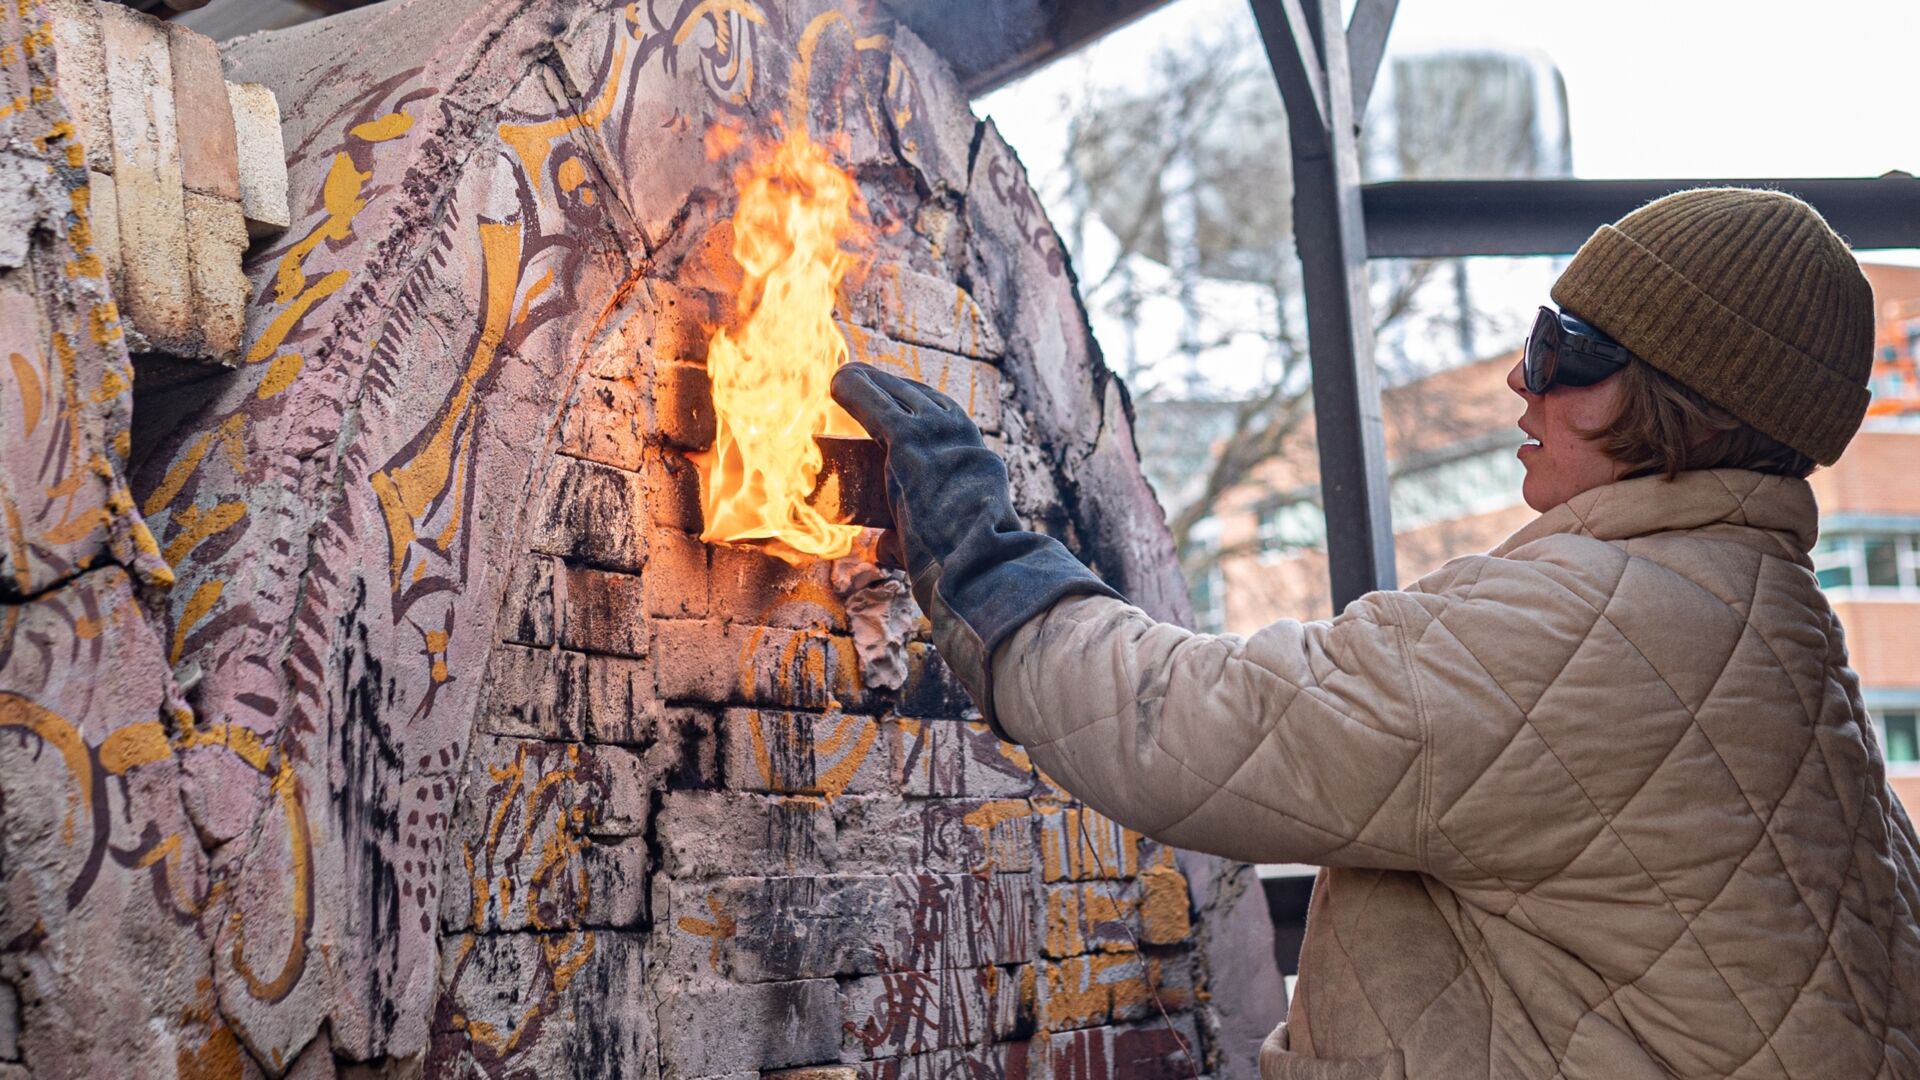 Student wearing gloves, goggles and a heavy coat sliding a brick into a ceramics kiln that has flames rising out of a vent hole.